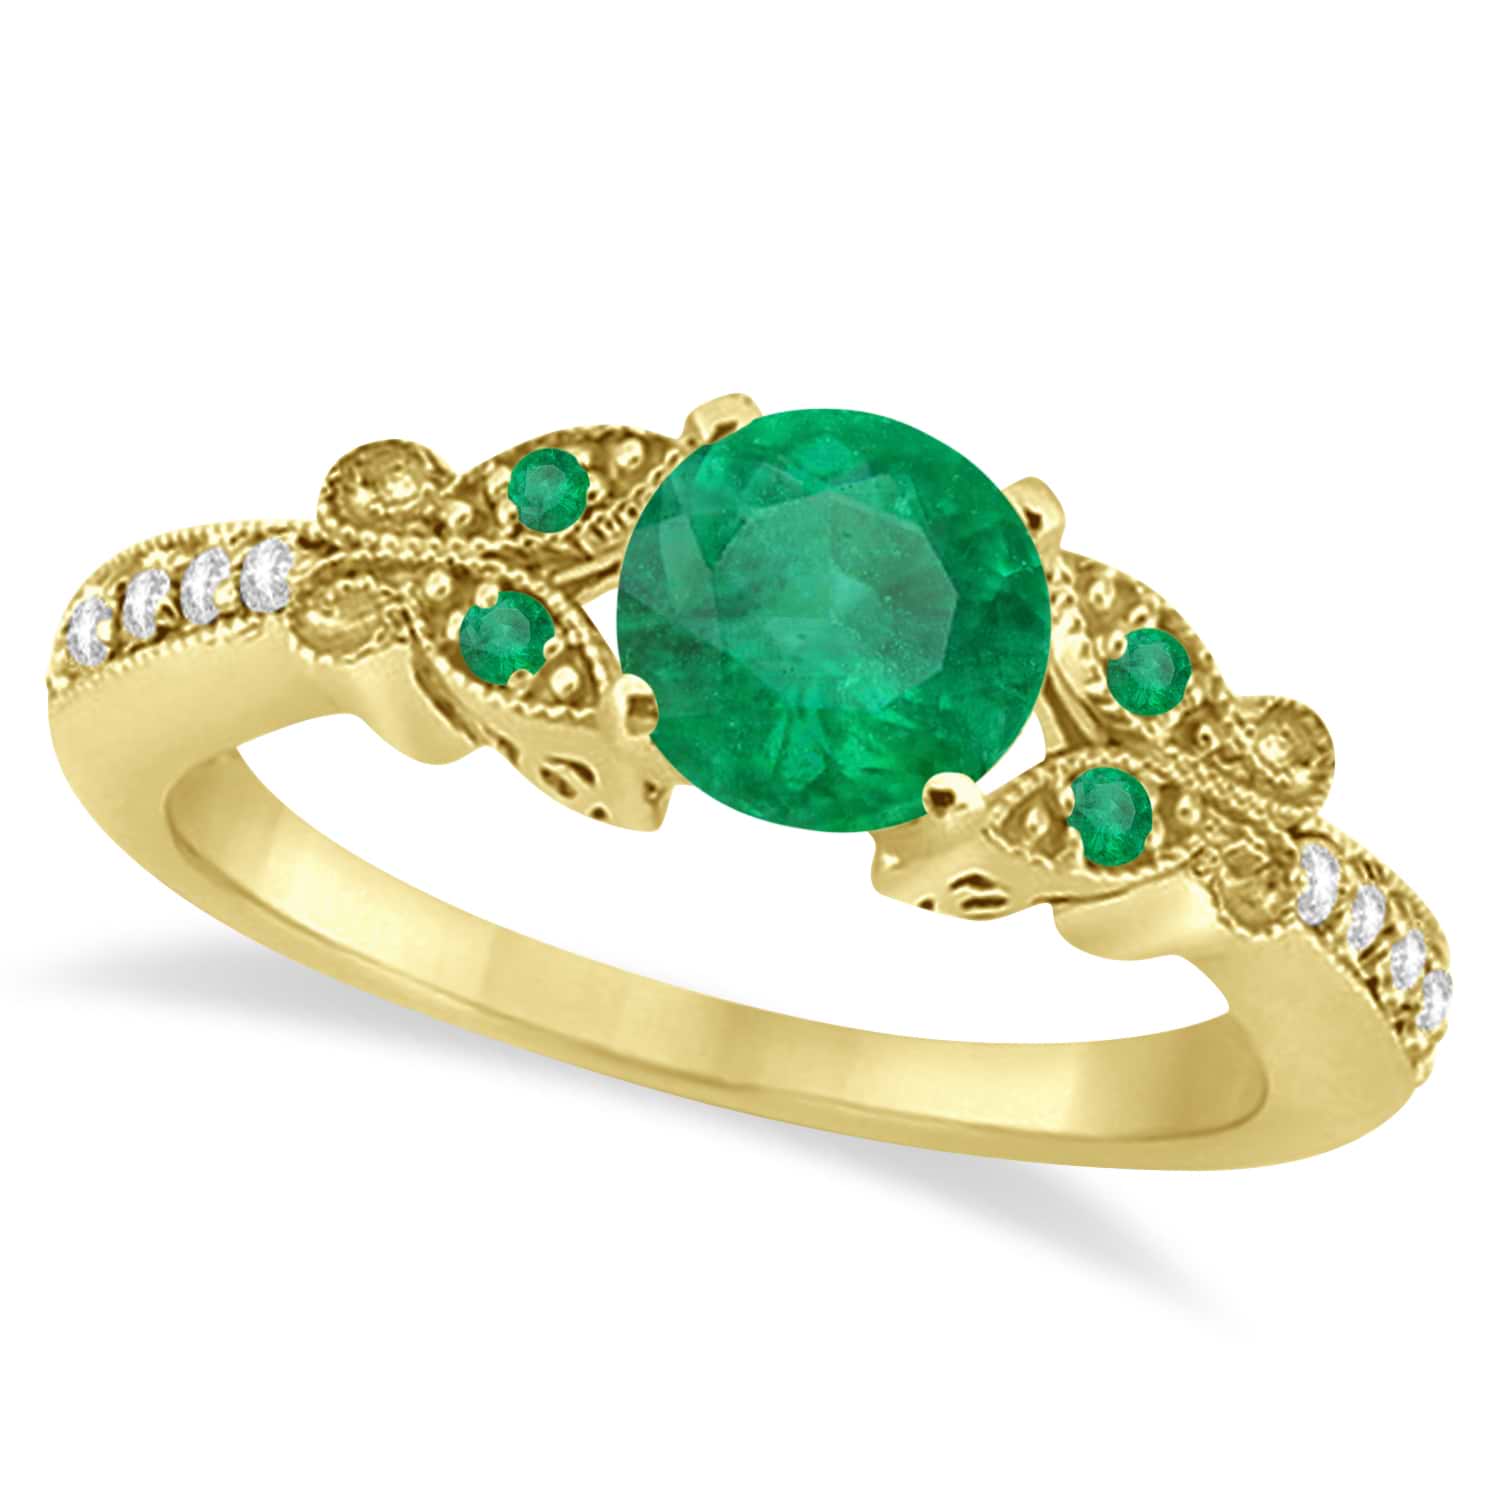 Butterfly Genuine Emerald & Diamond Engagement Ring 14K Yellow Gold 1.11ct